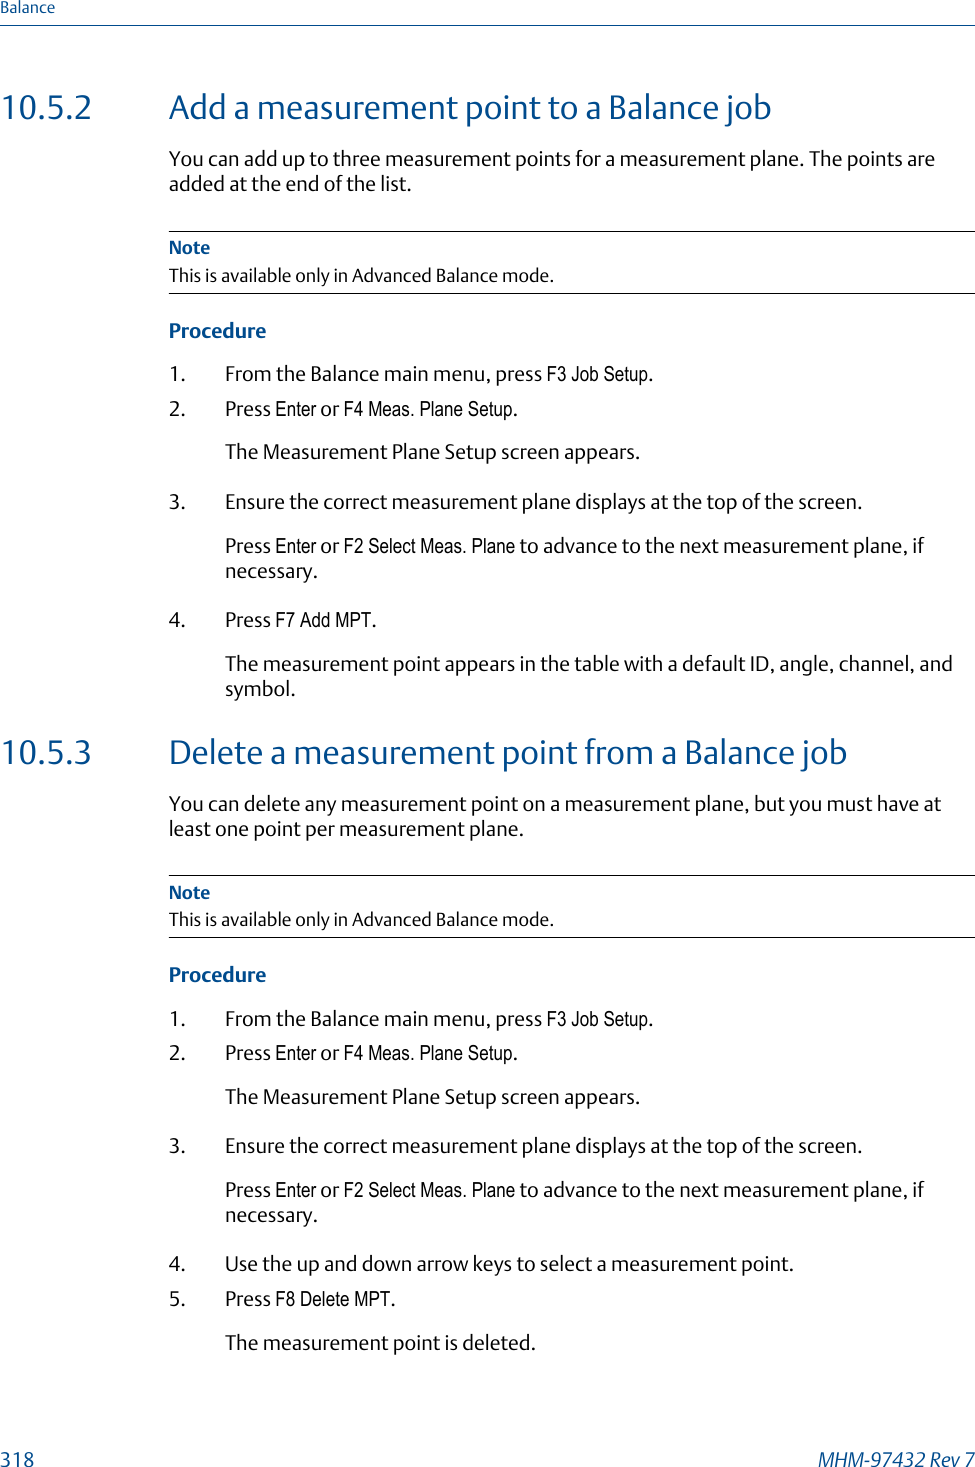 10.5.2 Add a measurement point to a Balance jobYou can add up to three measurement points for a measurement plane. The points areadded at the end of the list.NoteThis is available only in Advanced Balance mode.Procedure1. From the Balance main menu, press F3 Job Setup.2. Press Enter or F4 Meas. Plane Setup.The Measurement Plane Setup screen appears.3. Ensure the correct measurement plane displays at the top of the screen.Press Enter or F2 Select Meas. Plane to advance to the next measurement plane, ifnecessary.4. Press F7 Add MPT.The measurement point appears in the table with a default ID, angle, channel, andsymbol.10.5.3 Delete a measurement point from a Balance jobYou can delete any measurement point on a measurement plane, but you must have atleast one point per measurement plane.NoteThis is available only in Advanced Balance mode.Procedure1. From the Balance main menu, press F3 Job Setup.2. Press Enter or F4 Meas. Plane Setup.The Measurement Plane Setup screen appears.3. Ensure the correct measurement plane displays at the top of the screen.Press Enter or F2 Select Meas. Plane to advance to the next measurement plane, ifnecessary.4. Use the up and down arrow keys to select a measurement point.5. Press F8 Delete MPT.The measurement point is deleted.Balance318 MHM-97432 Rev 7